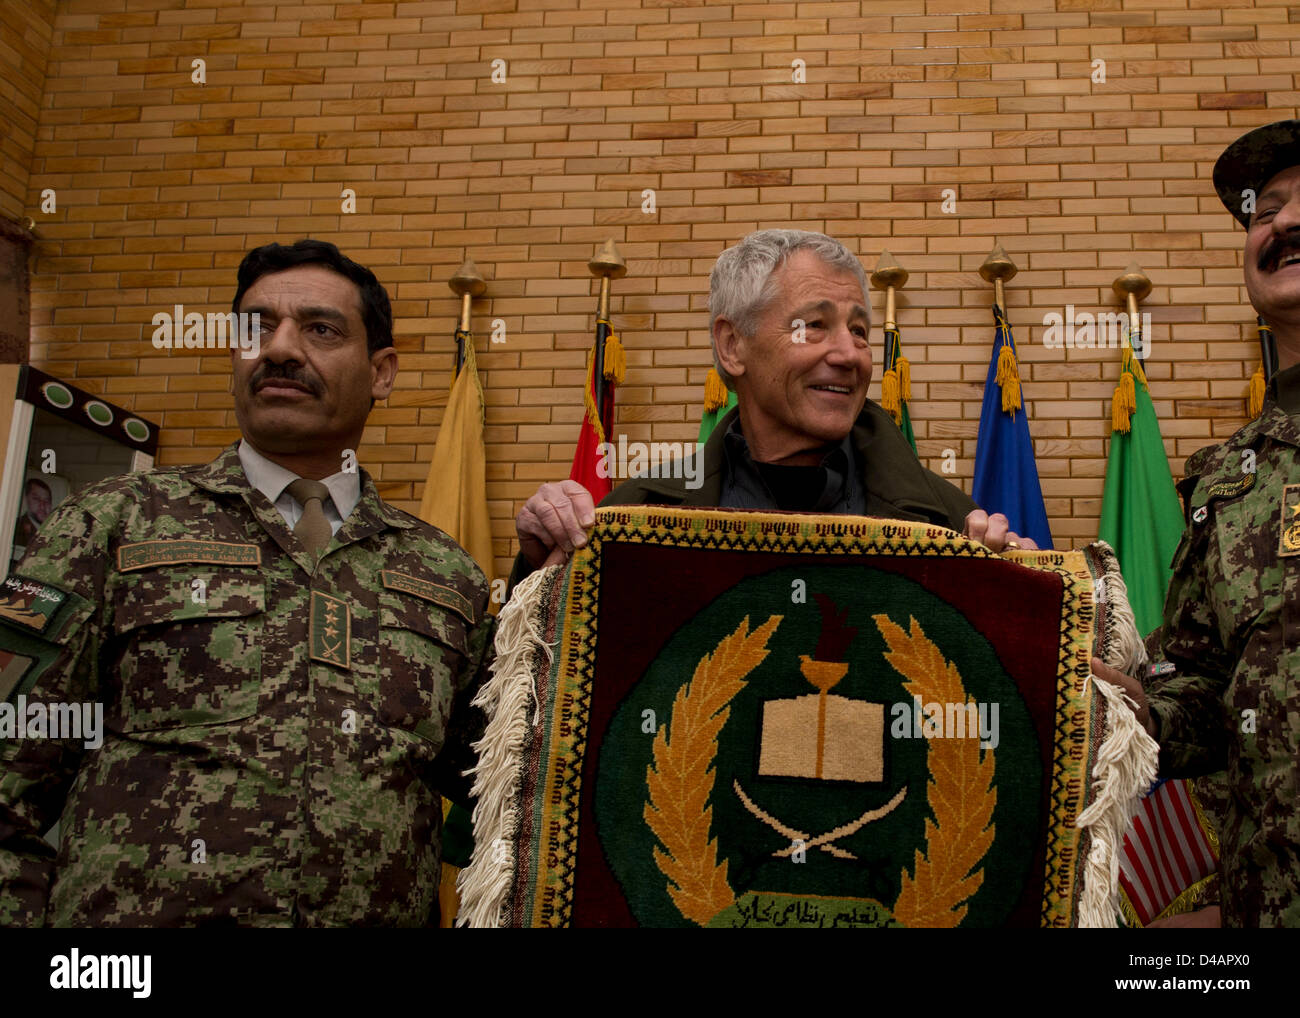 US Secretary of Defense Chuck Hagel is presented with a handmade Afghan rug with the logo of the Kabul Military Training Center by Afghan Brigadier General Aminullah Patyani, Commander of the Kabul Military Training Center March 10, 2013 in Kabul, Afghanistan. Hagel is in Afghanistan on his first trip as the Secretary of Defense visiting US troops, NATO and Afghan leaders. Stock Photo